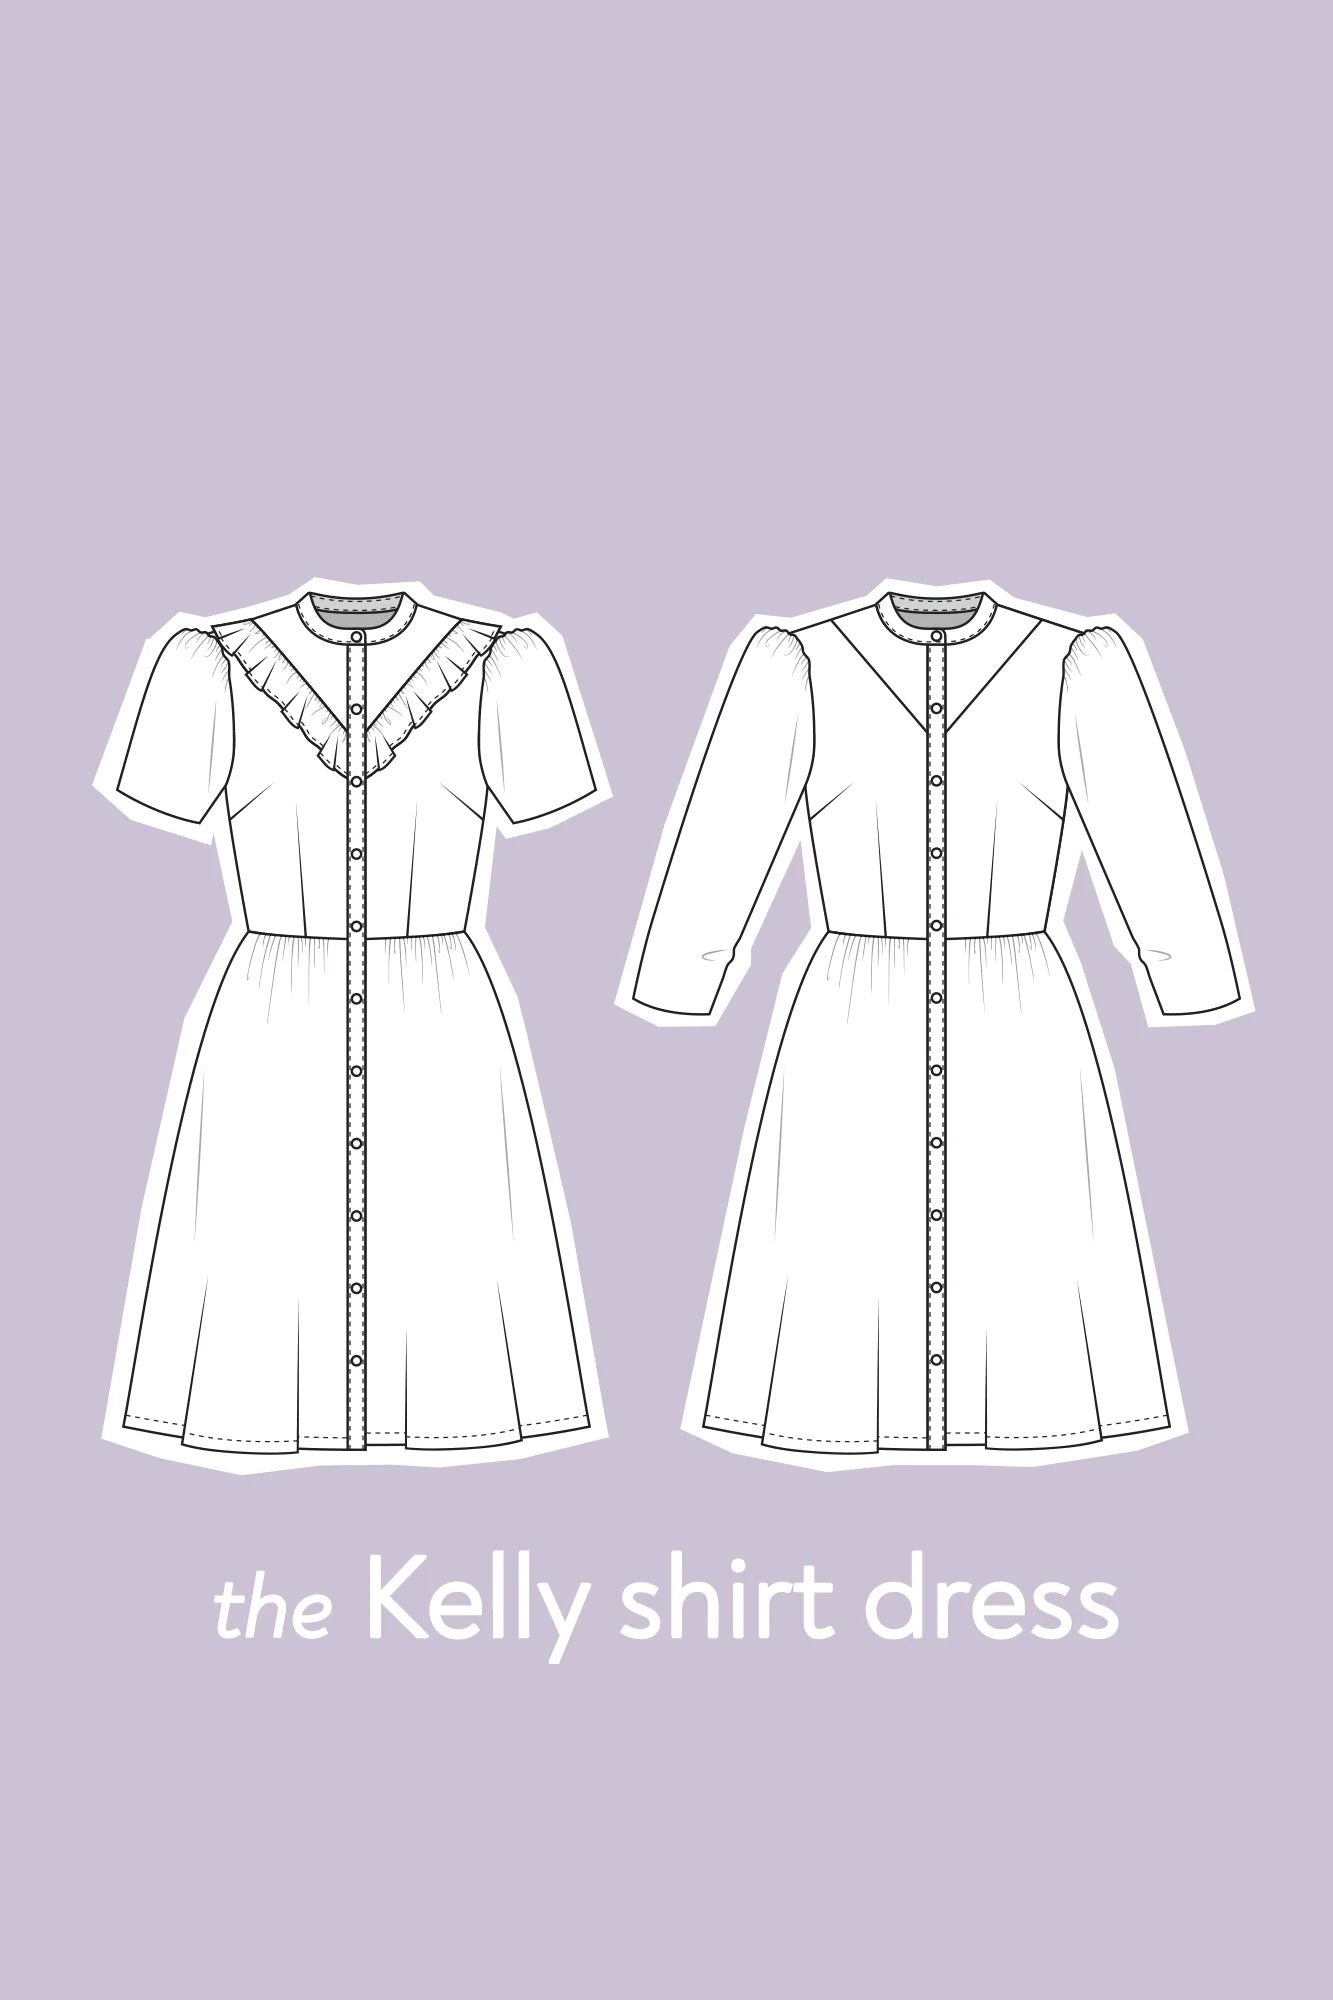 The Kelly Shirt Dress sewing pattern from Forget-me-not Patterns on The Fold Line. A dress pattern made in chambray, poplin, shirting, flannel, double gauze, swiss dot, stable viscose/rayon, or linen fabric, featuring a fitted darted bodice with a stand collar, button front, v-shaped inset with optional ruffle, gathered puff sleeves, and lightly gathered skirt.